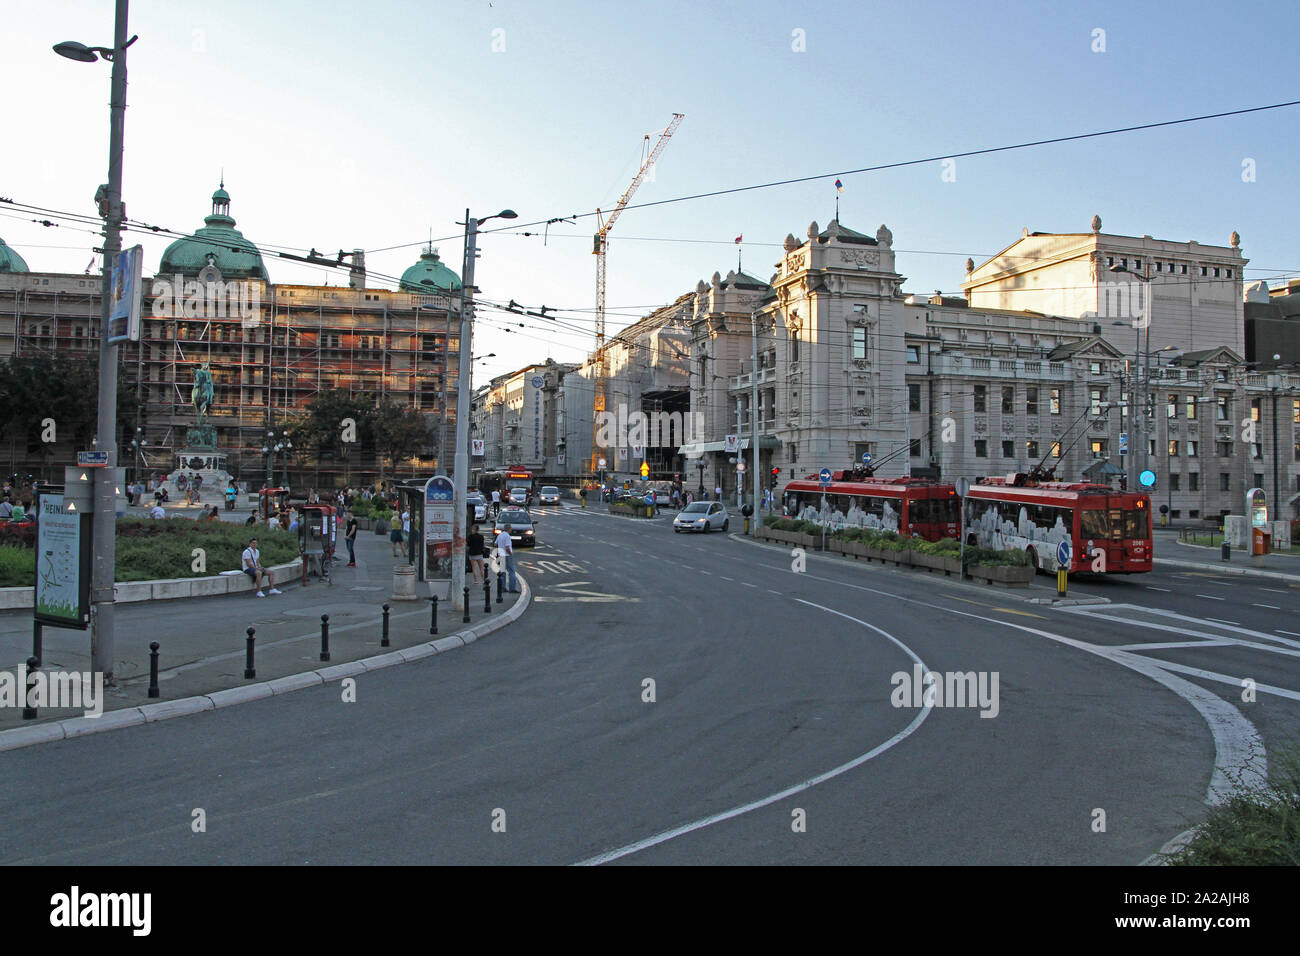 Republic square / Trg Republike on Vase Carapica Street with view of National Museum and National Theatre, Belgrade, Serbia. Stock Photo